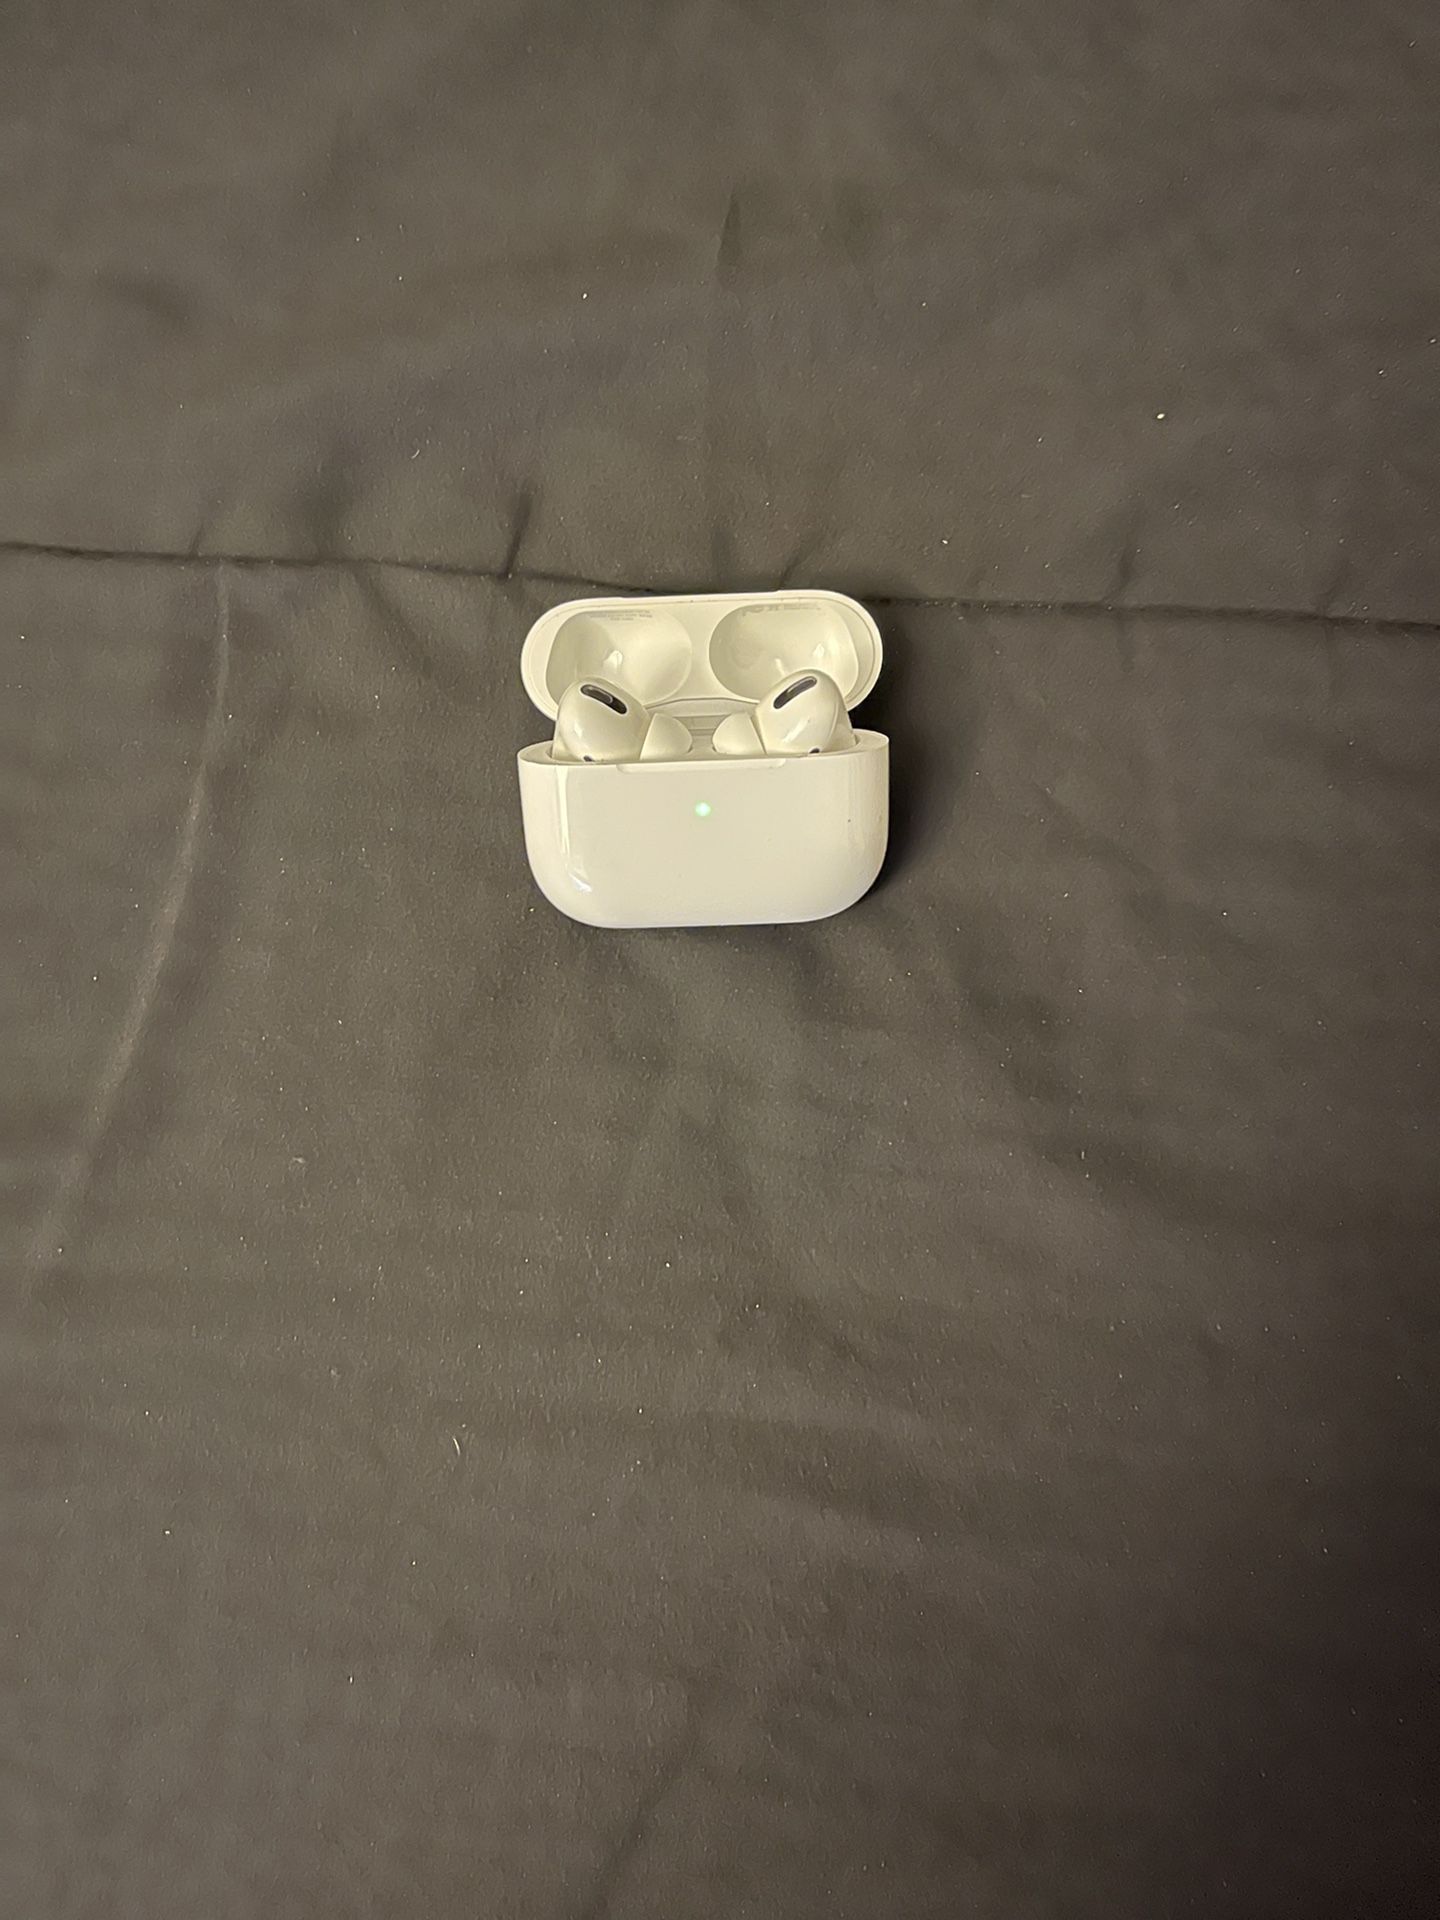 Apple AirPods Pro Still in the box cost me $350 will let them go for $200